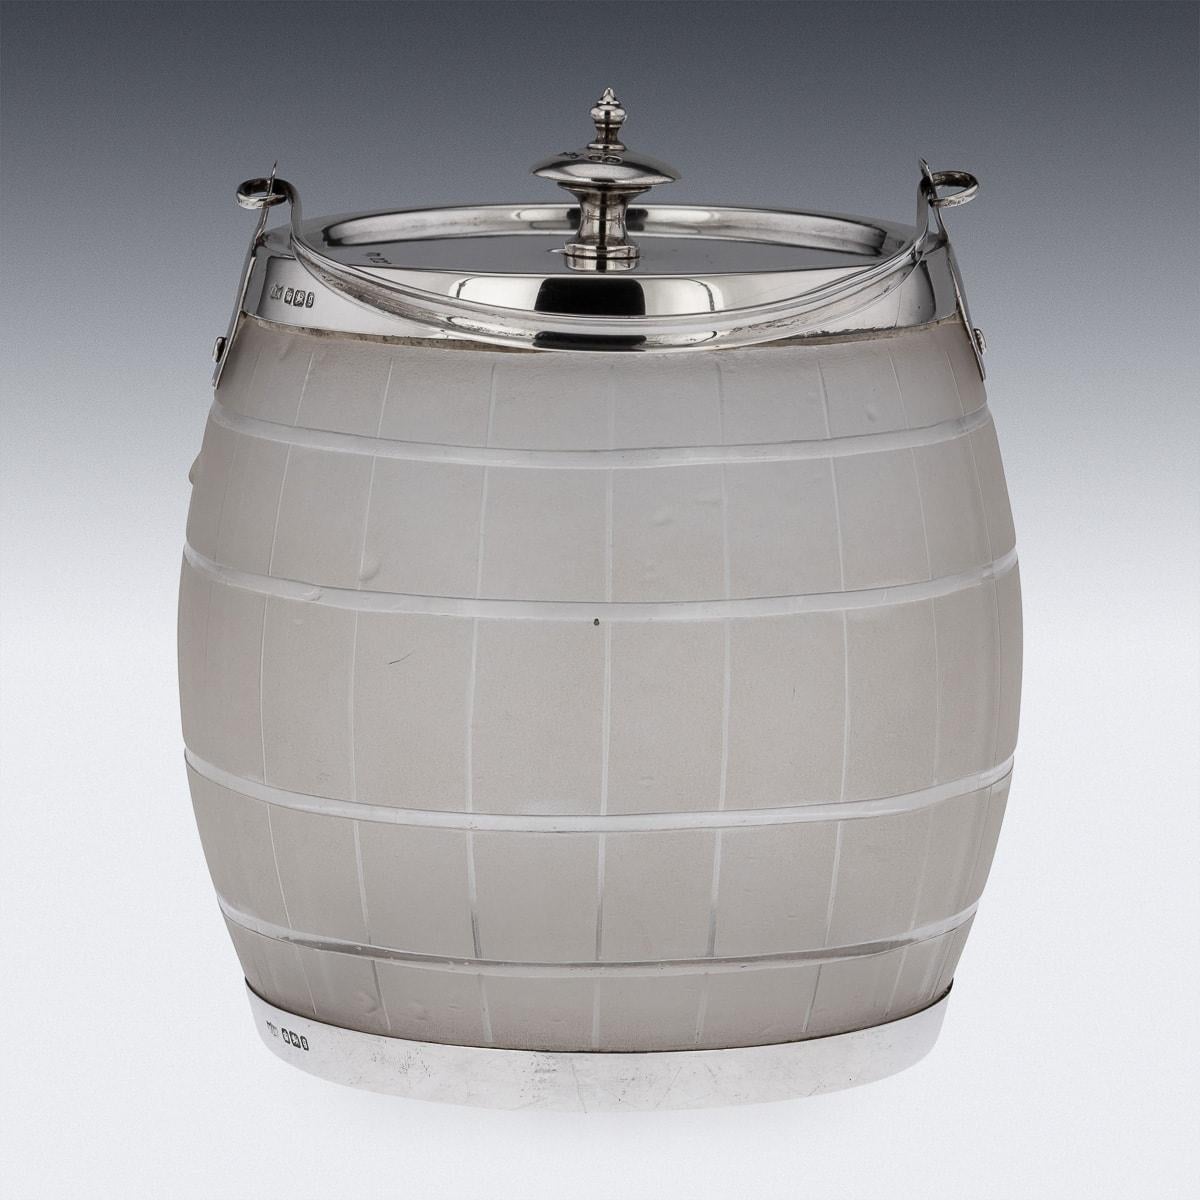 Antique 19th Century Victorian solid silver and frosted glass ice bucket a swinging handle in a shape of a whisky barrel. A wonderful example of Victorian creativity and ingenuity with this rather fabulous cut-glass ice or biscuit barrel with solid